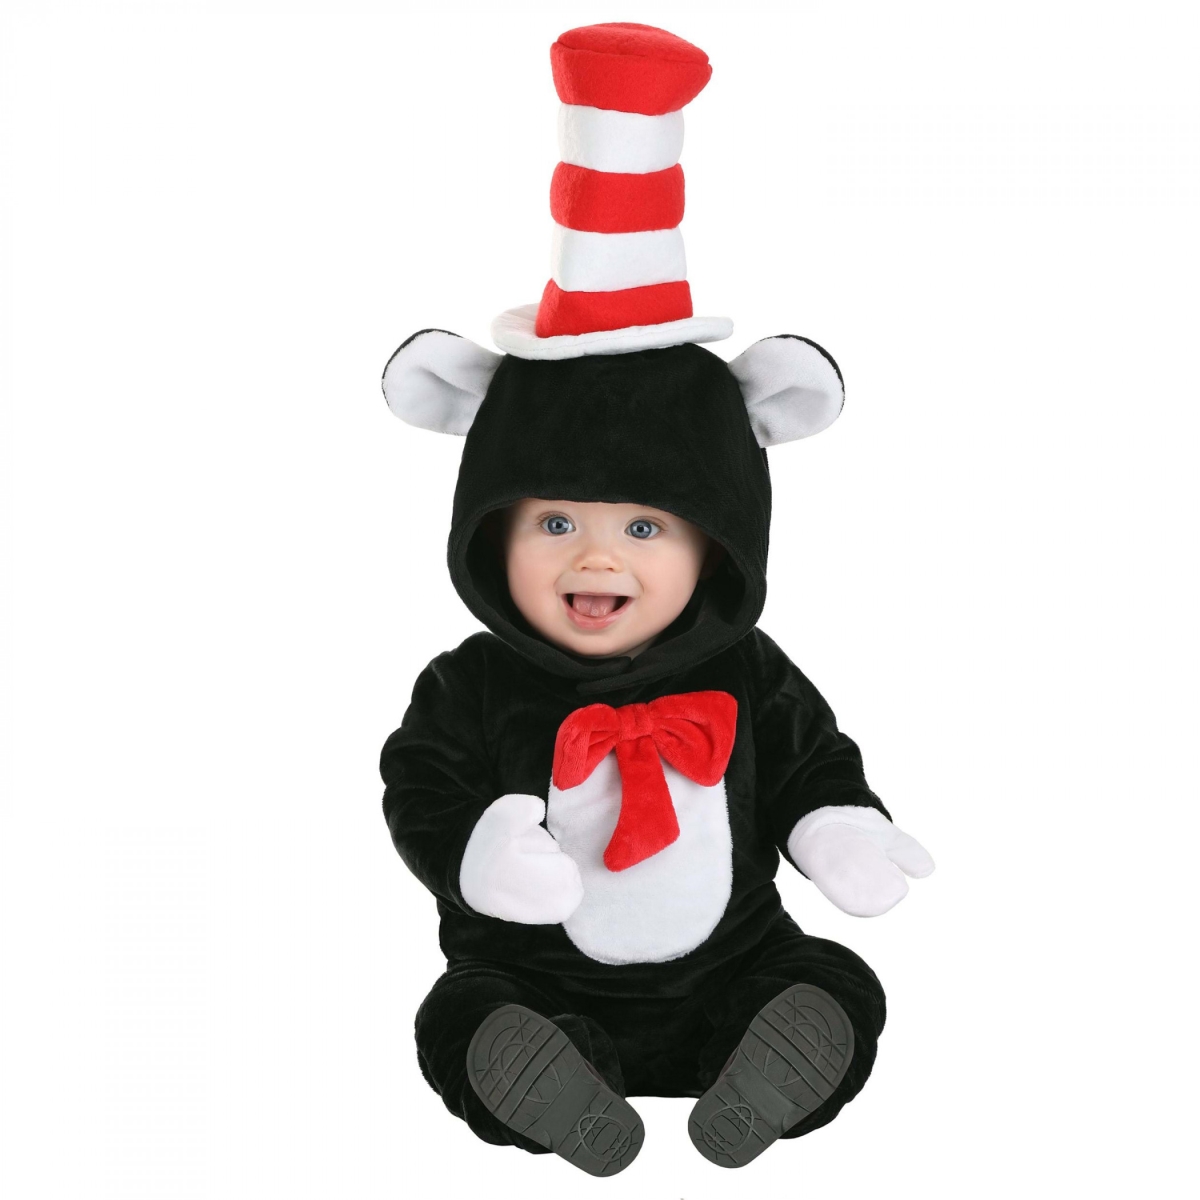 Dr. Seuss 849404-3-6months The Cat in the Hat Infant one piece - 3-6 Months